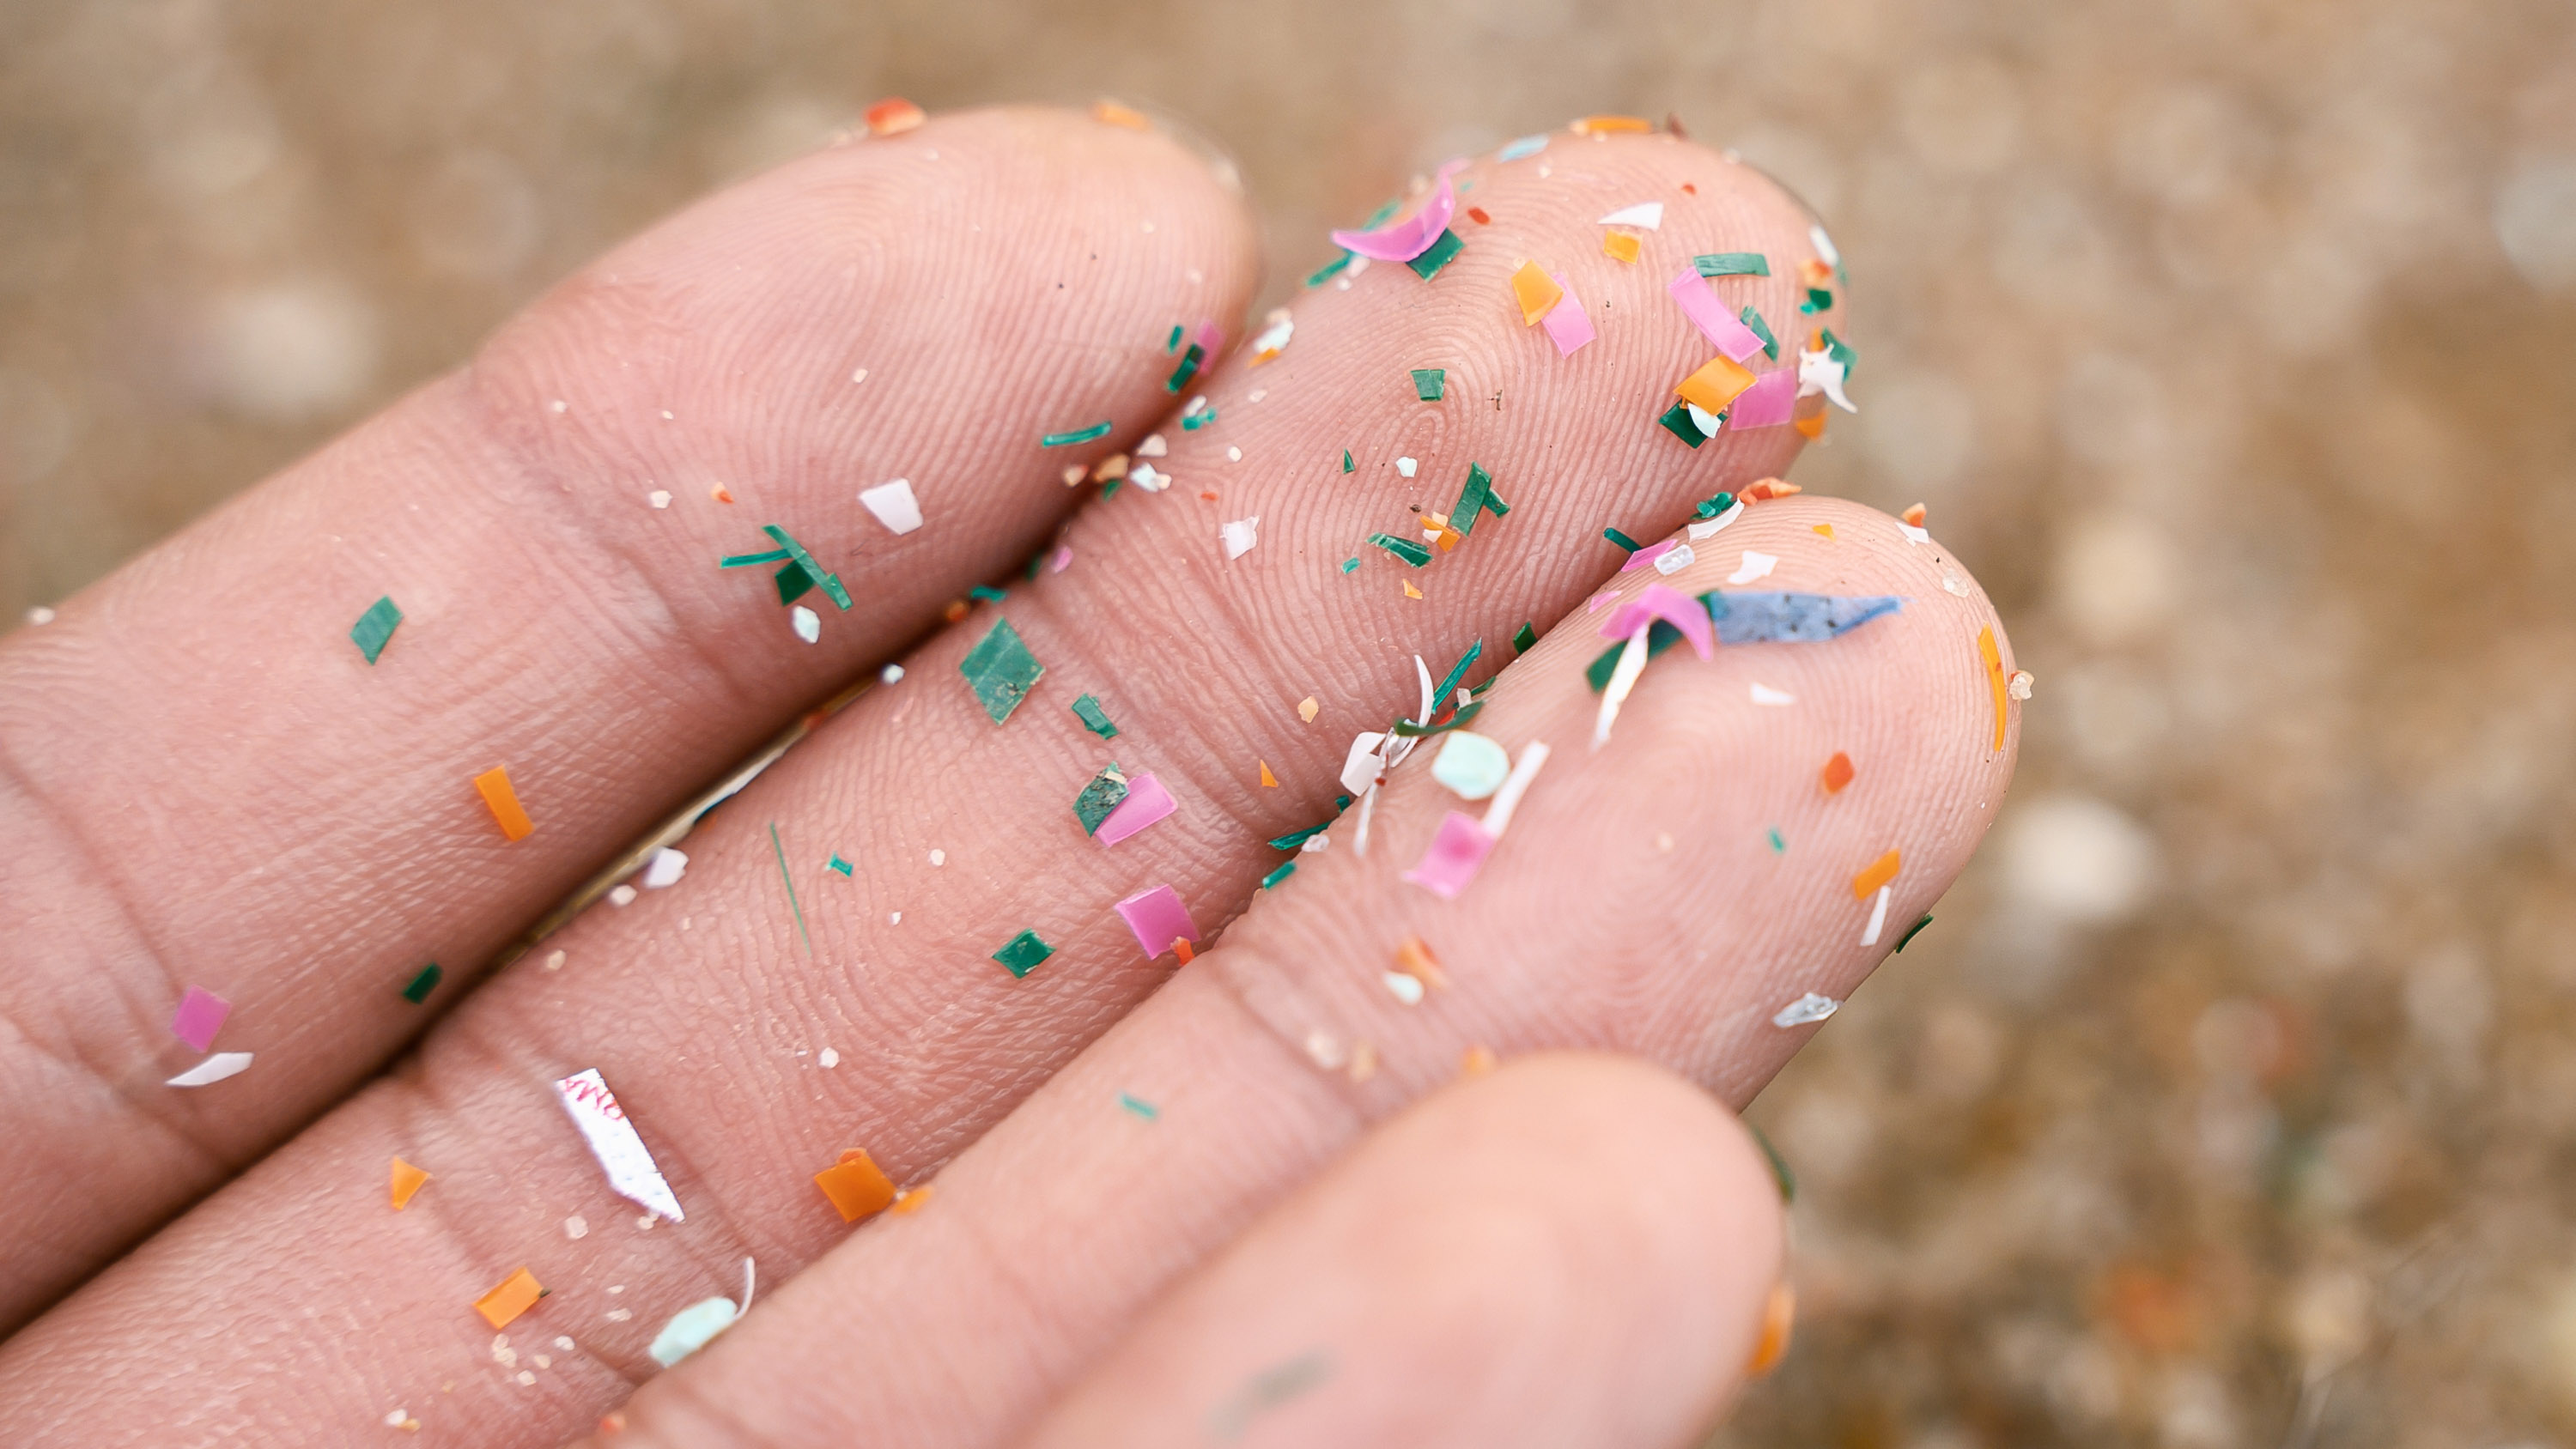 Microplastic fragments on a person's fingers